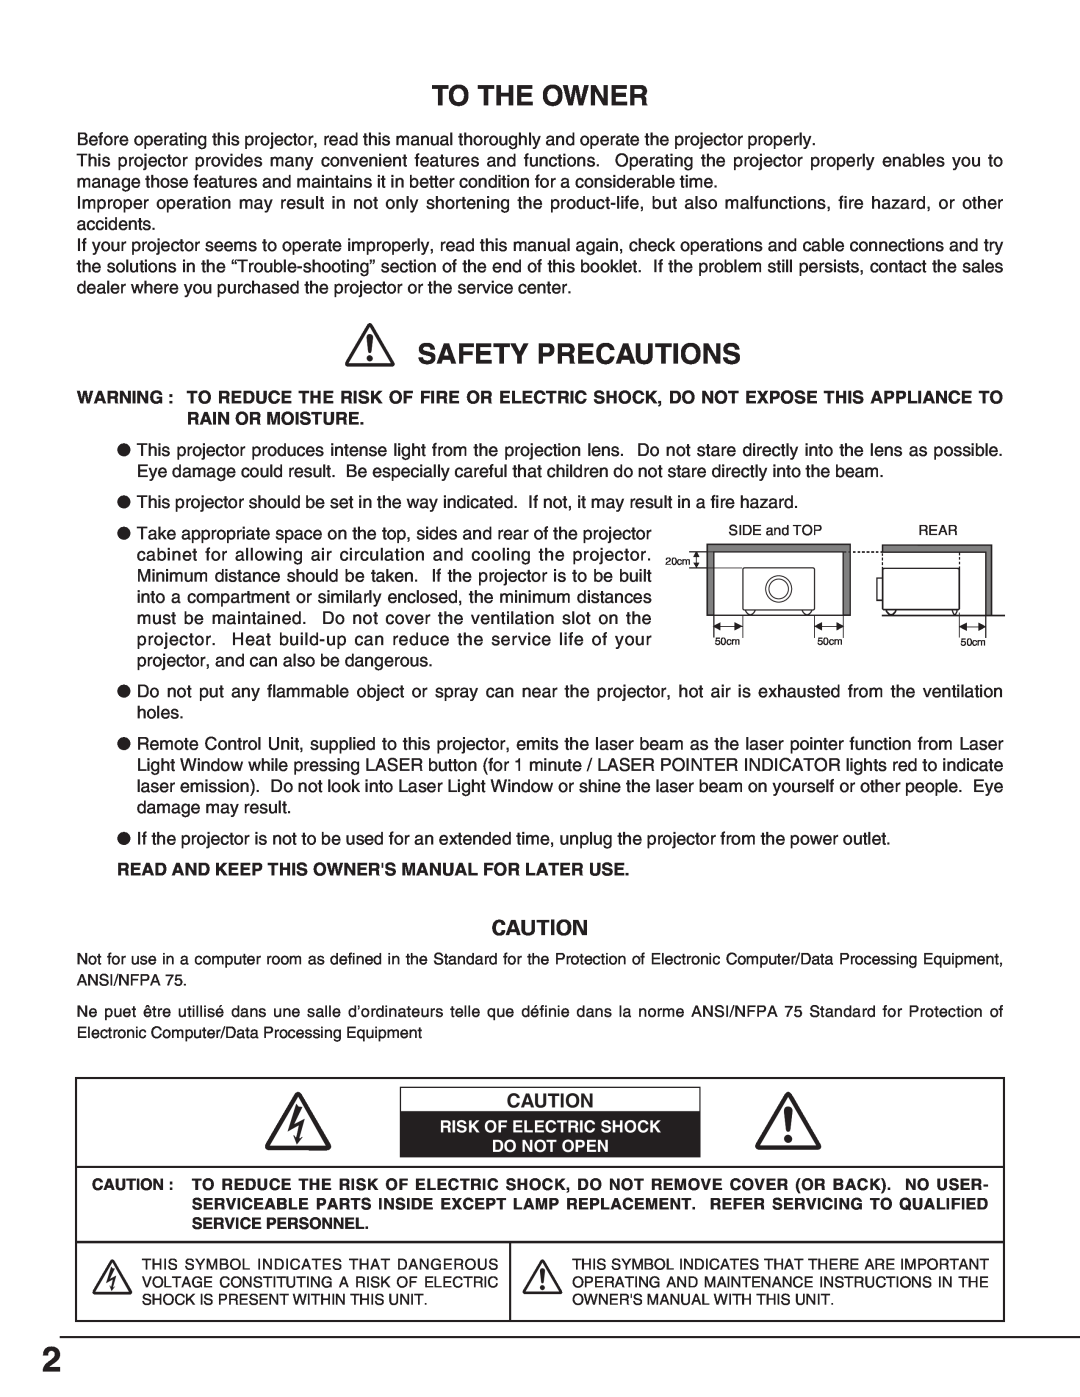 Eiki LC-X70 instruction manual To The Owner, Safety Precautions 